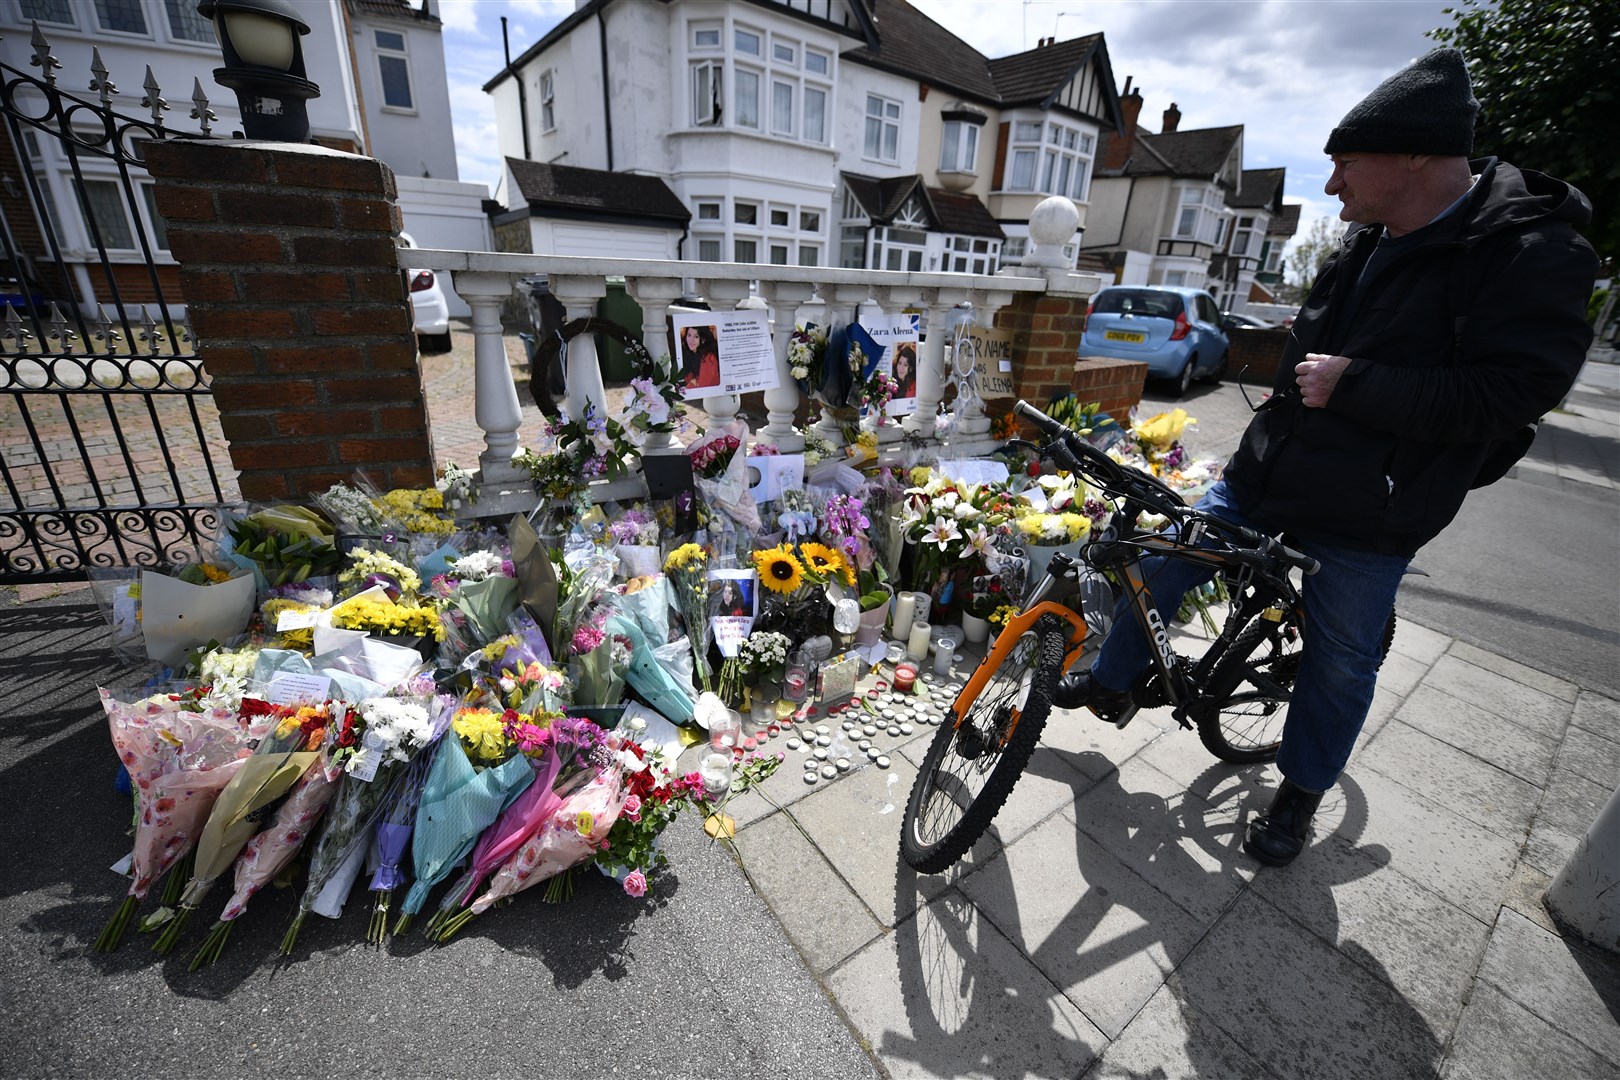 Flowers are left after the vigil (Beresford Hodge/PA)